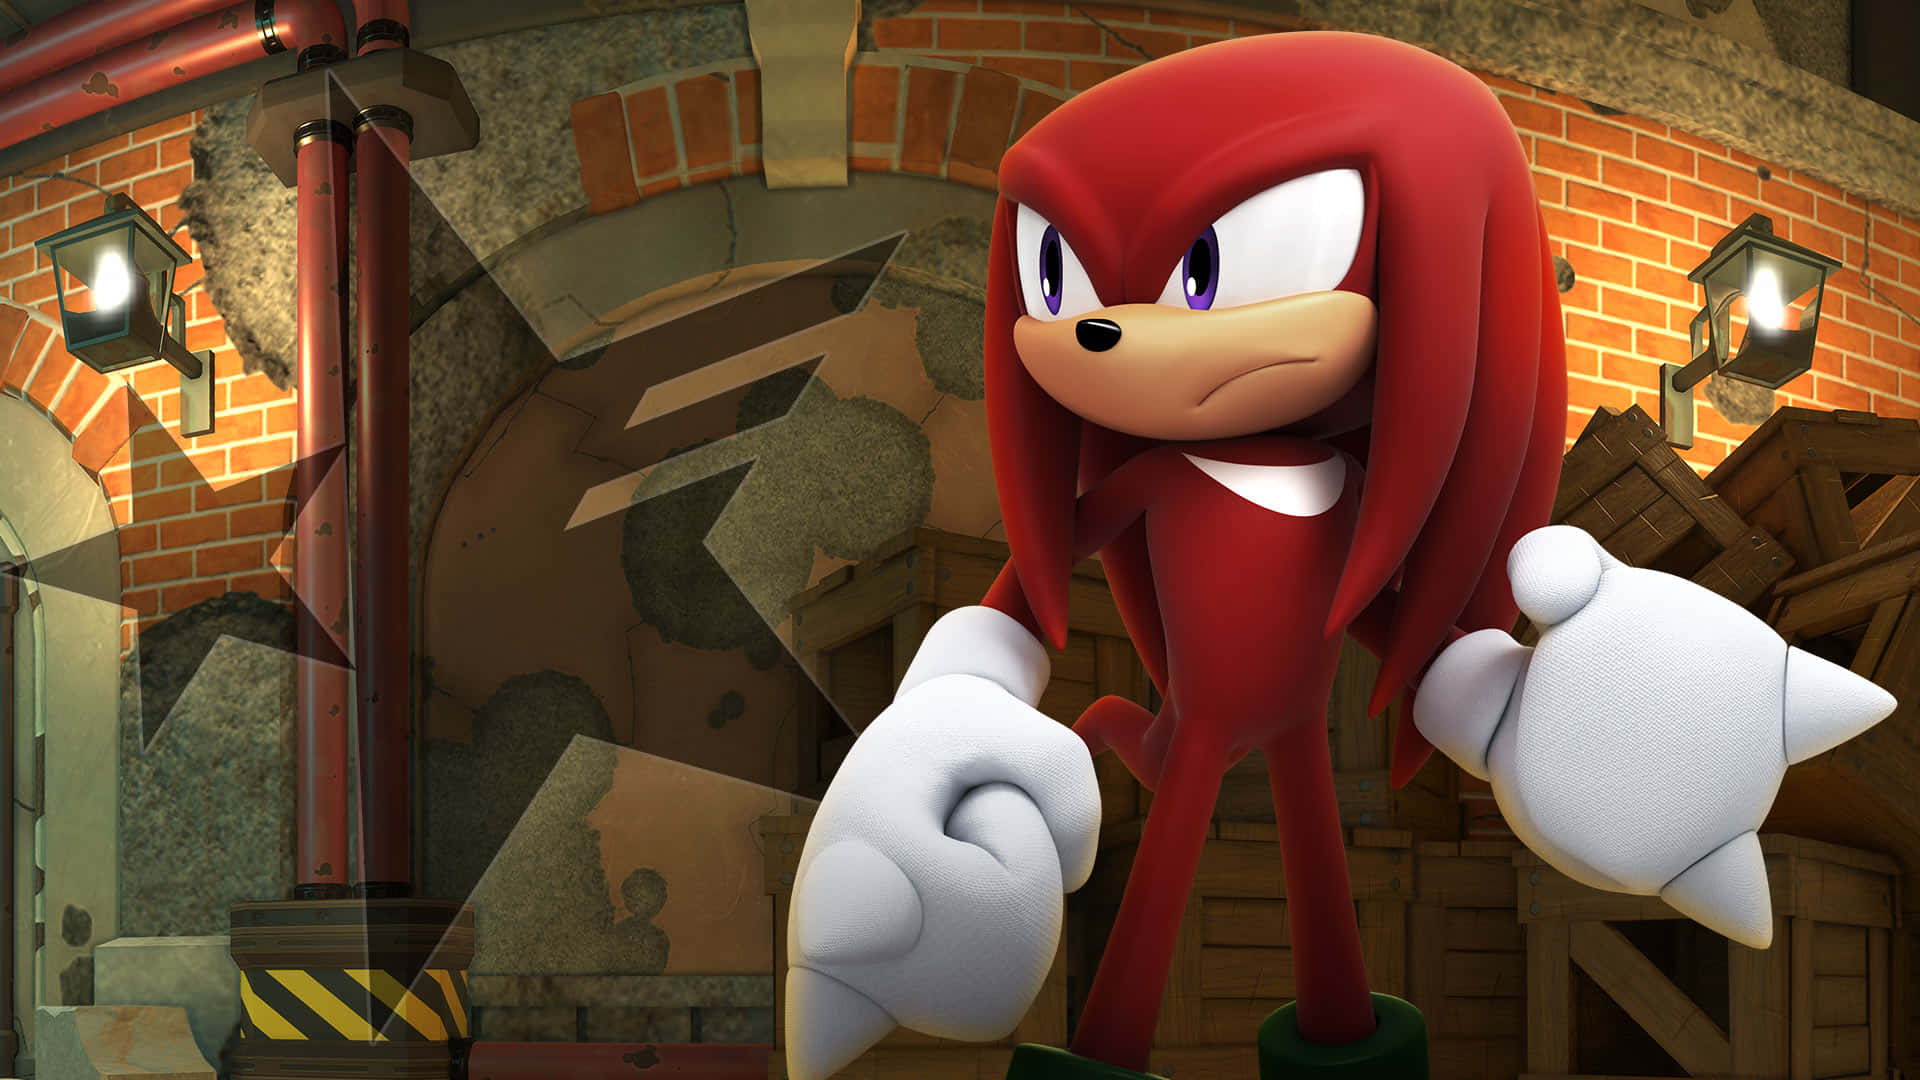 Knuckles The Echidna And Brick Wall Wallpaper